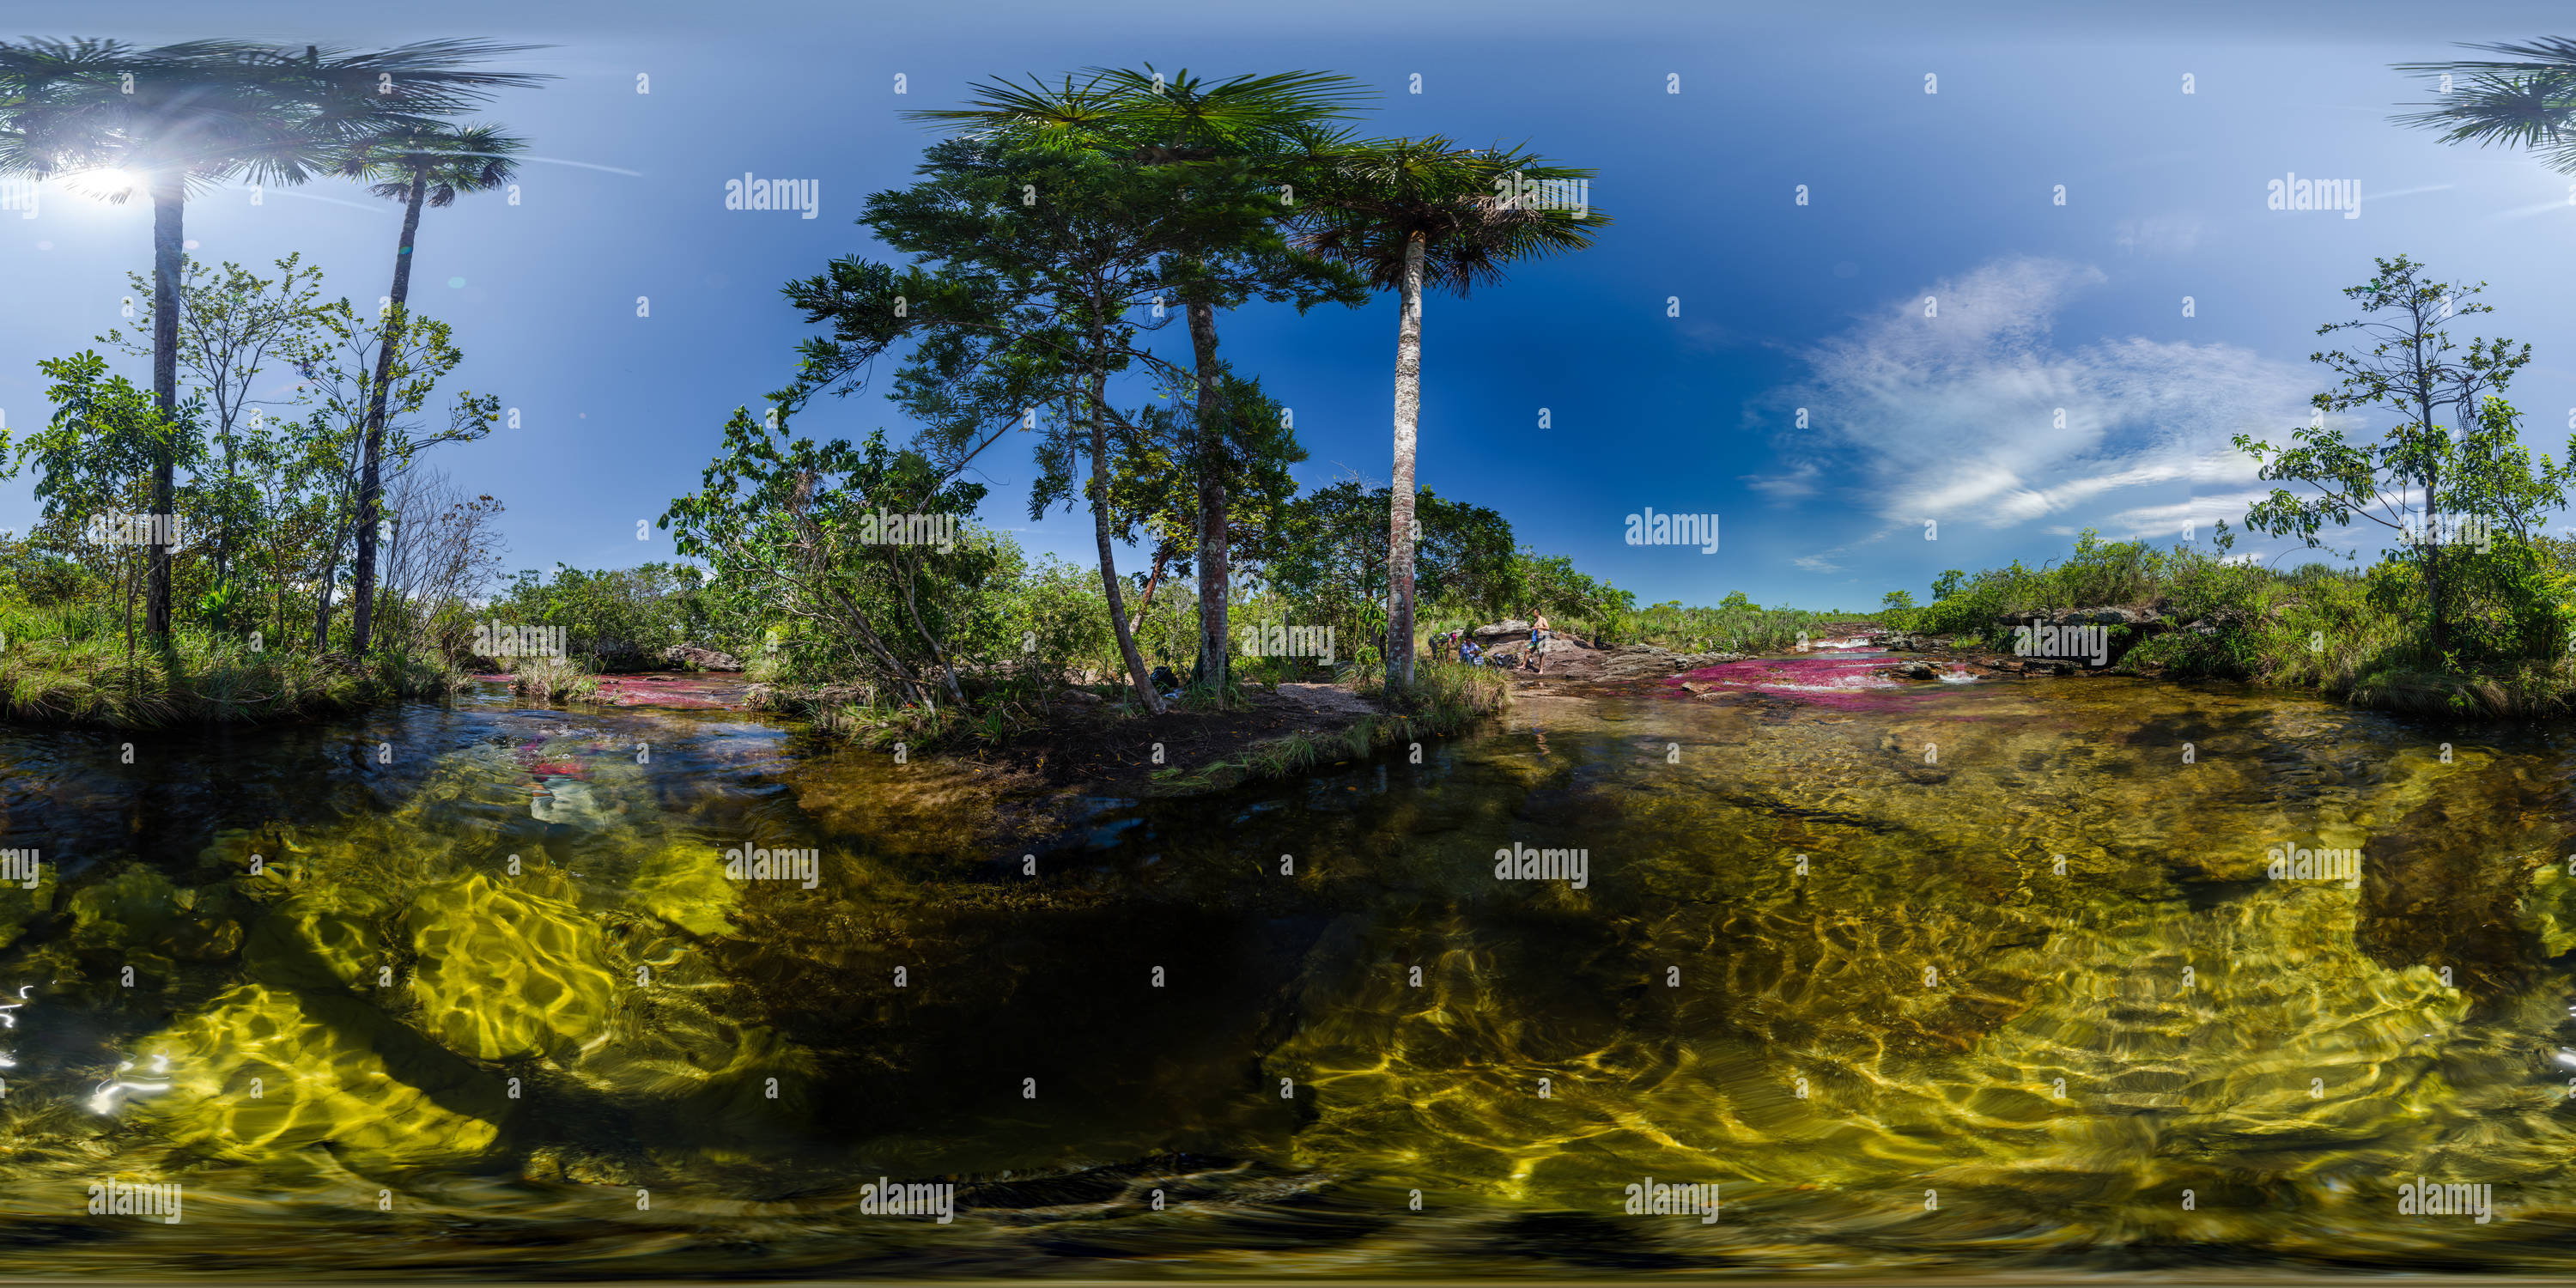 360 degree panoramic view of Caño Cristales, Meta, Colombia